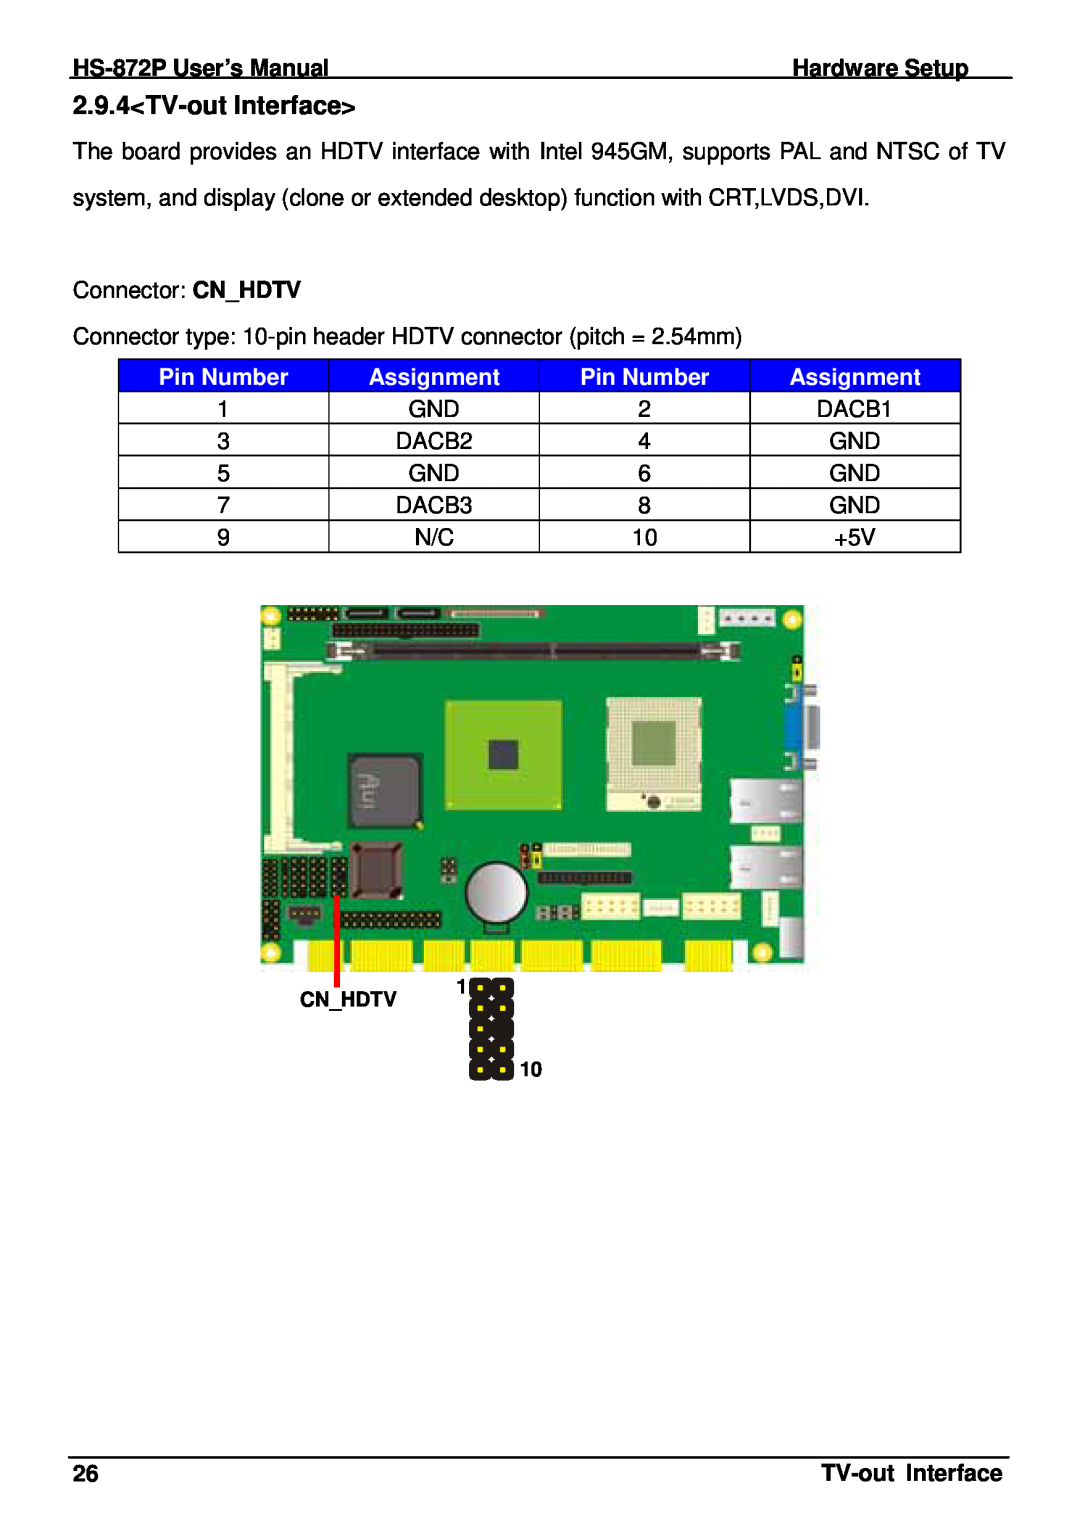 Intel HS-872P, half-size single board computer user manual 2.9.4TV-out Interface, Pin Number, Assignment, Cnhdtv 